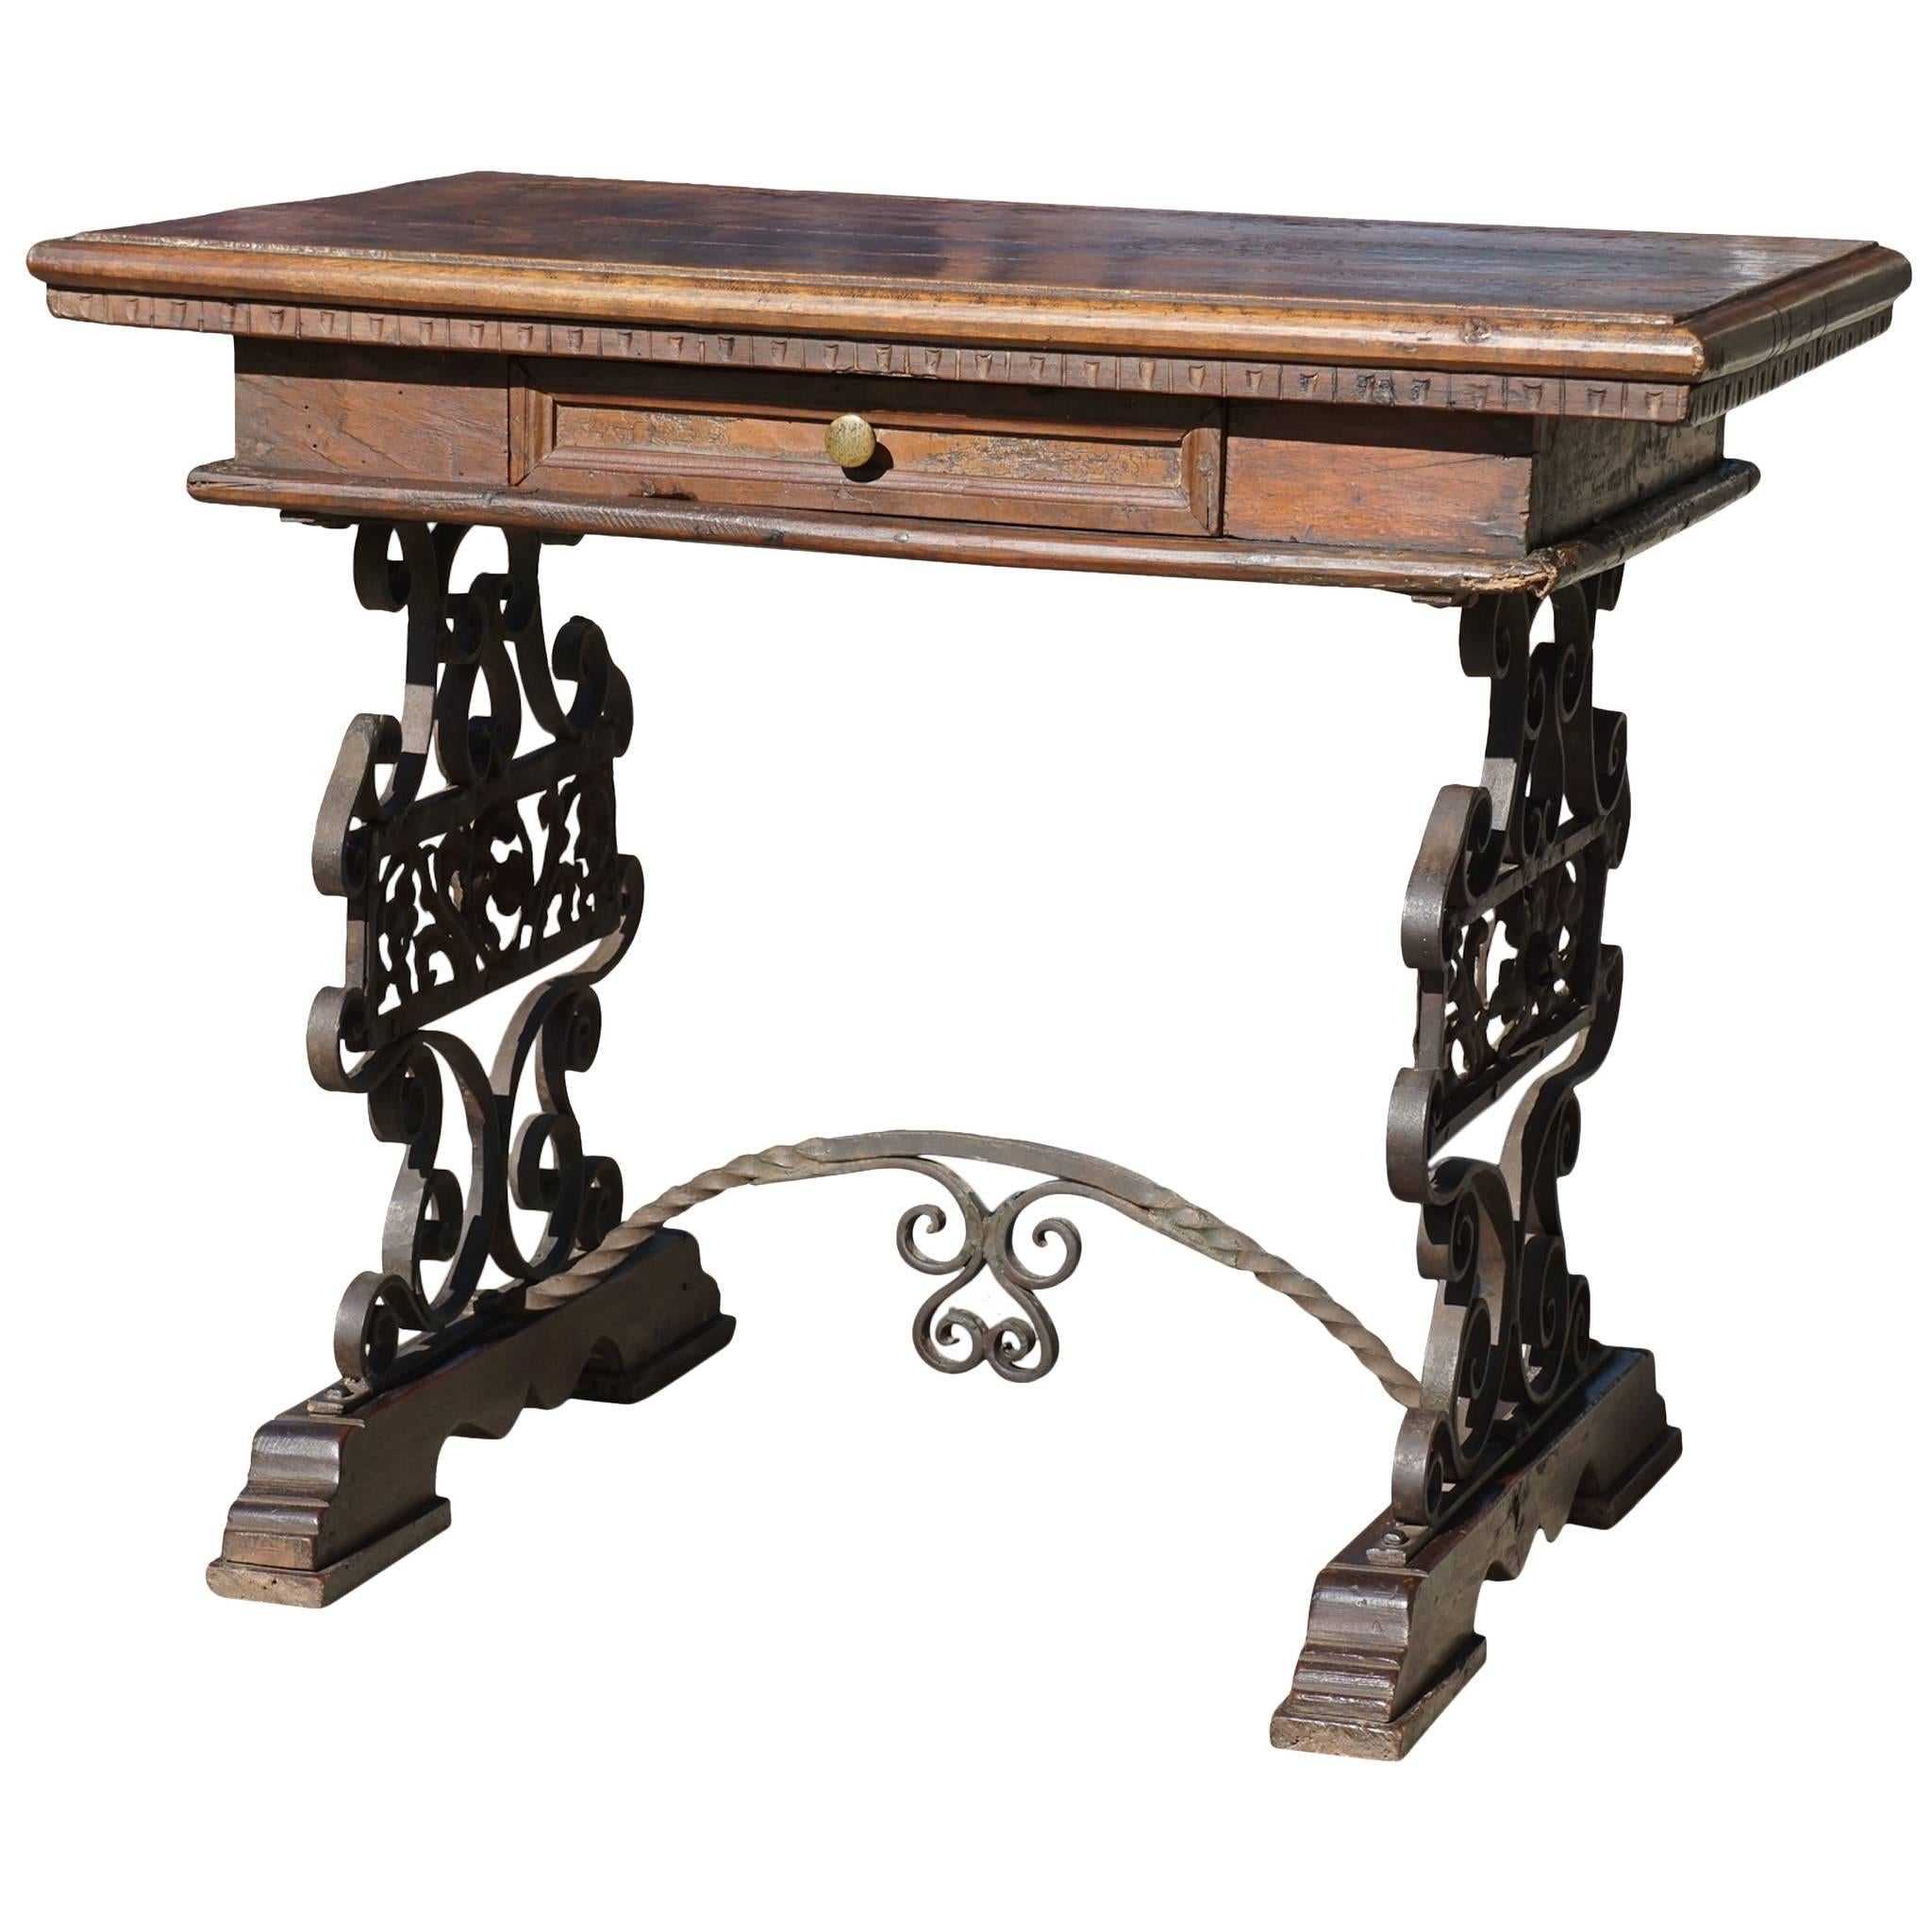  Late 19th Century Italian Walnut and Hand-Wrought Iron Low Table For Sale